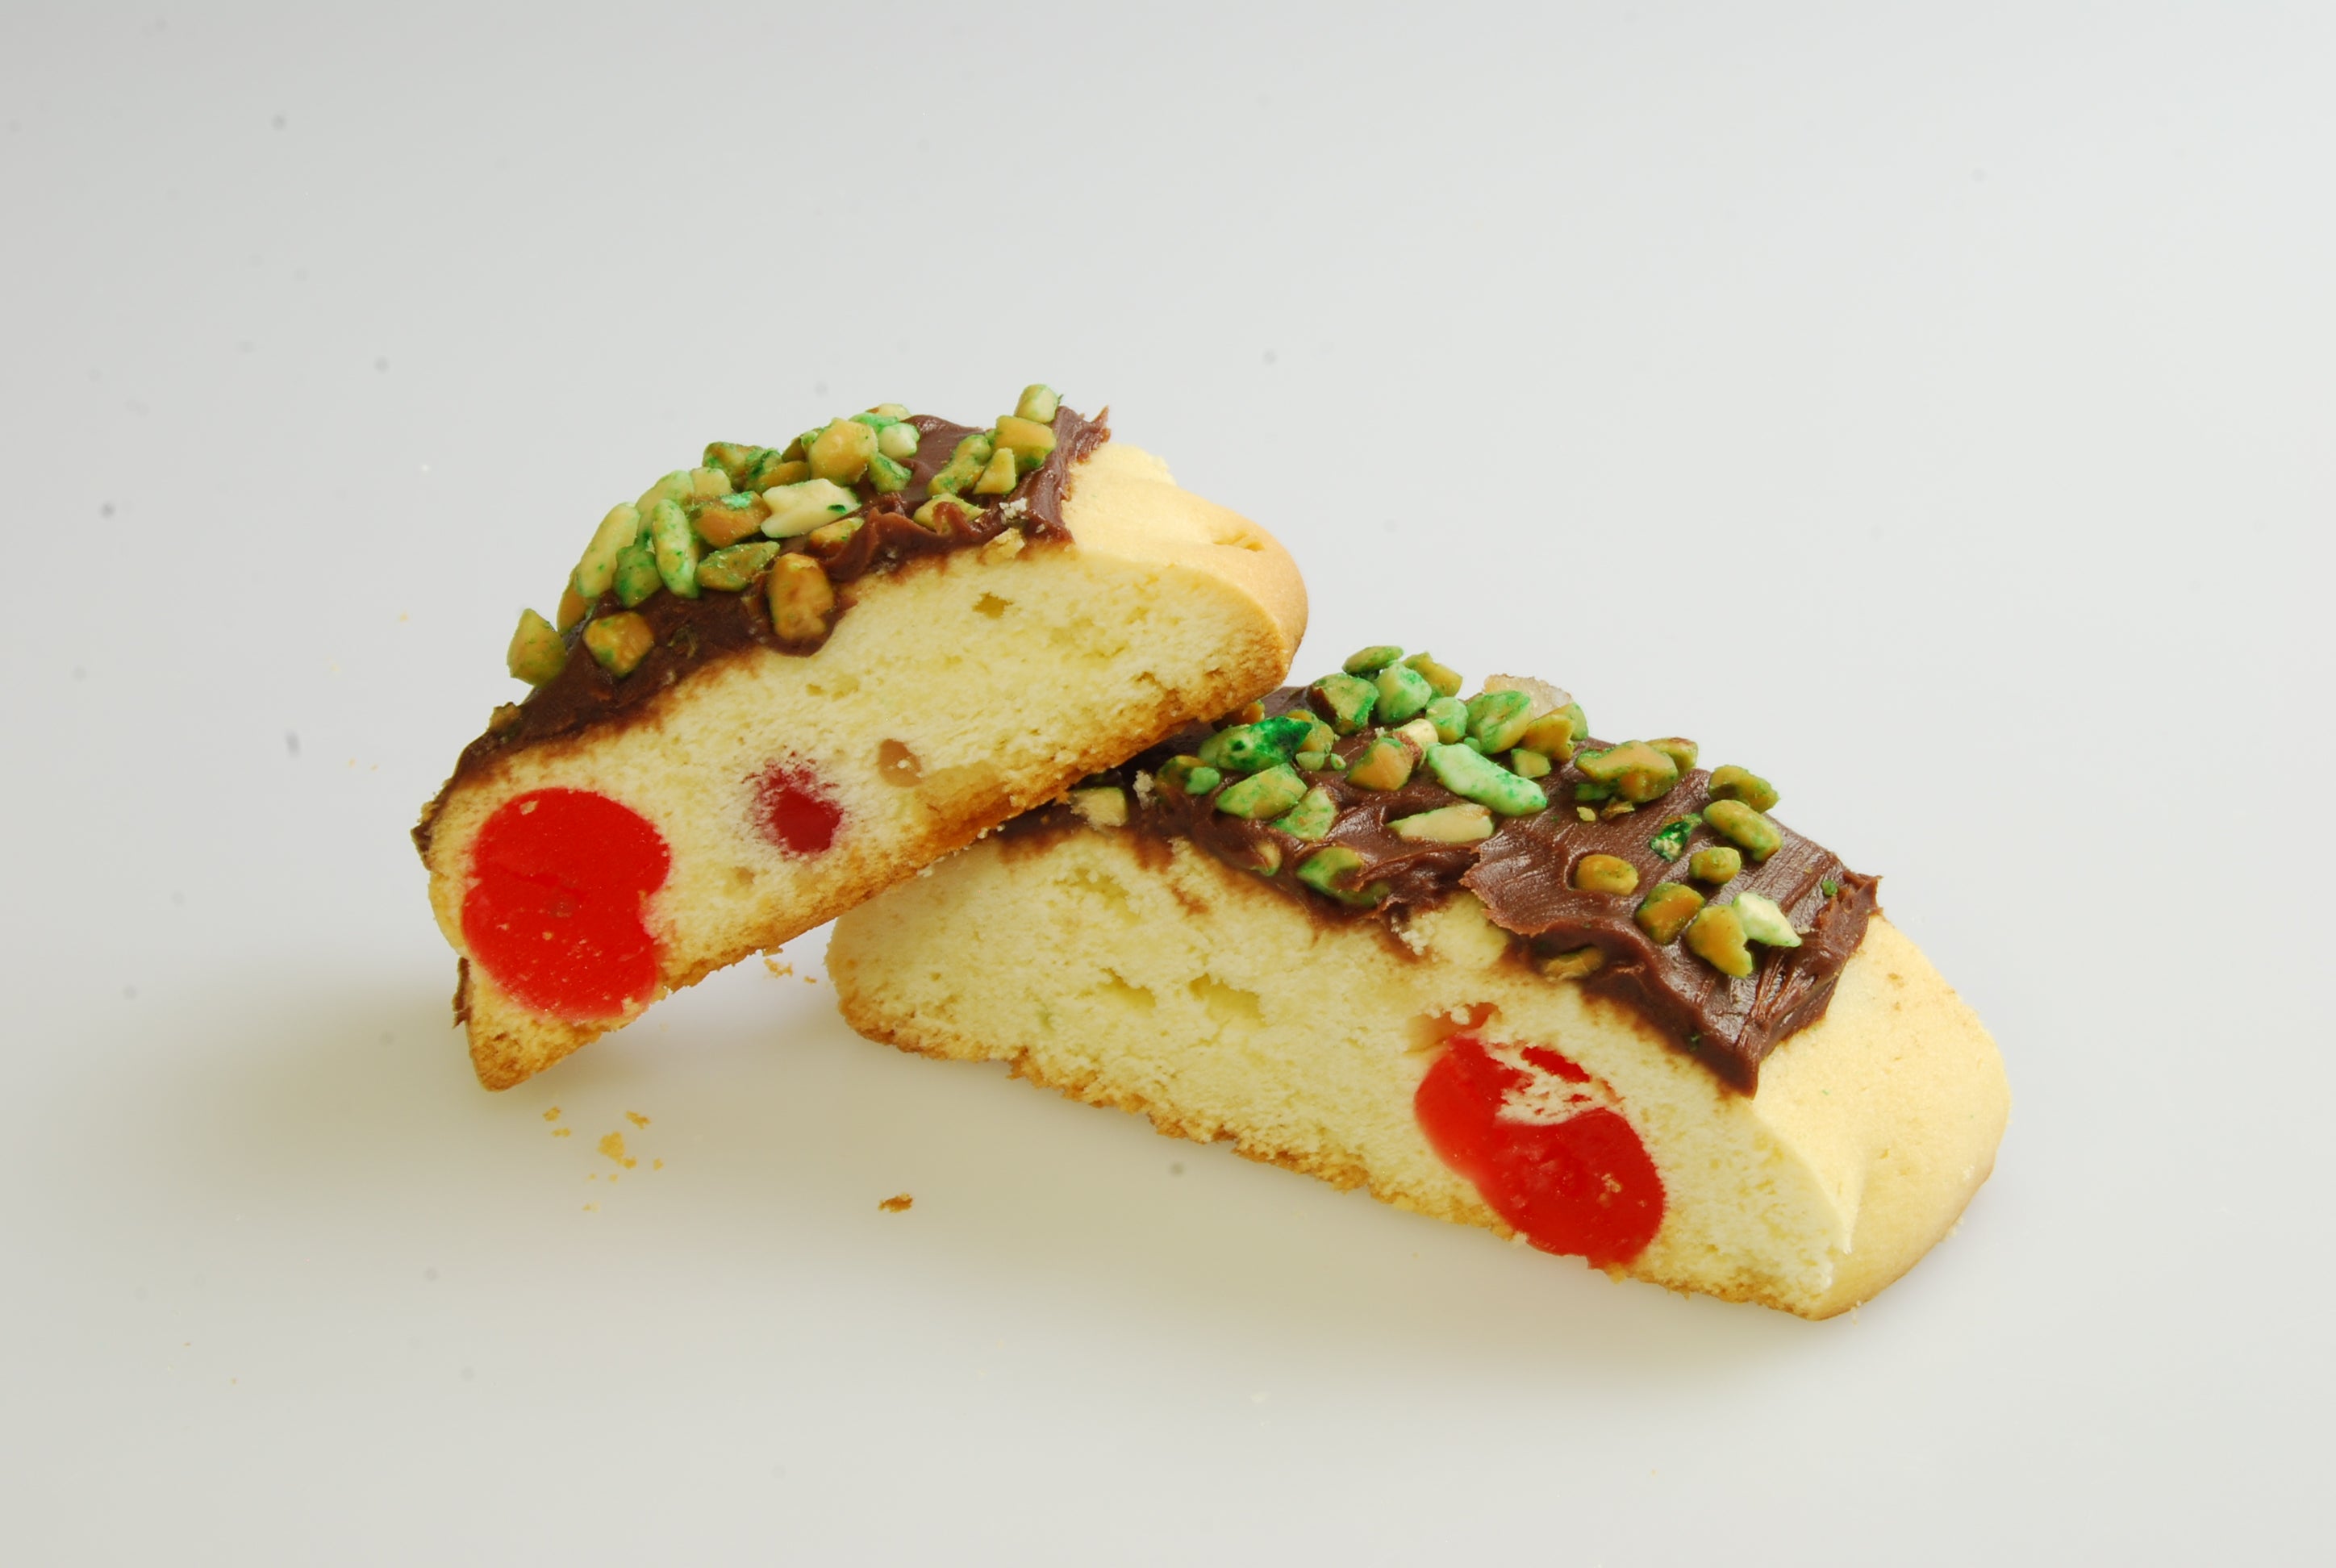 Slices with Fruits and Nuts